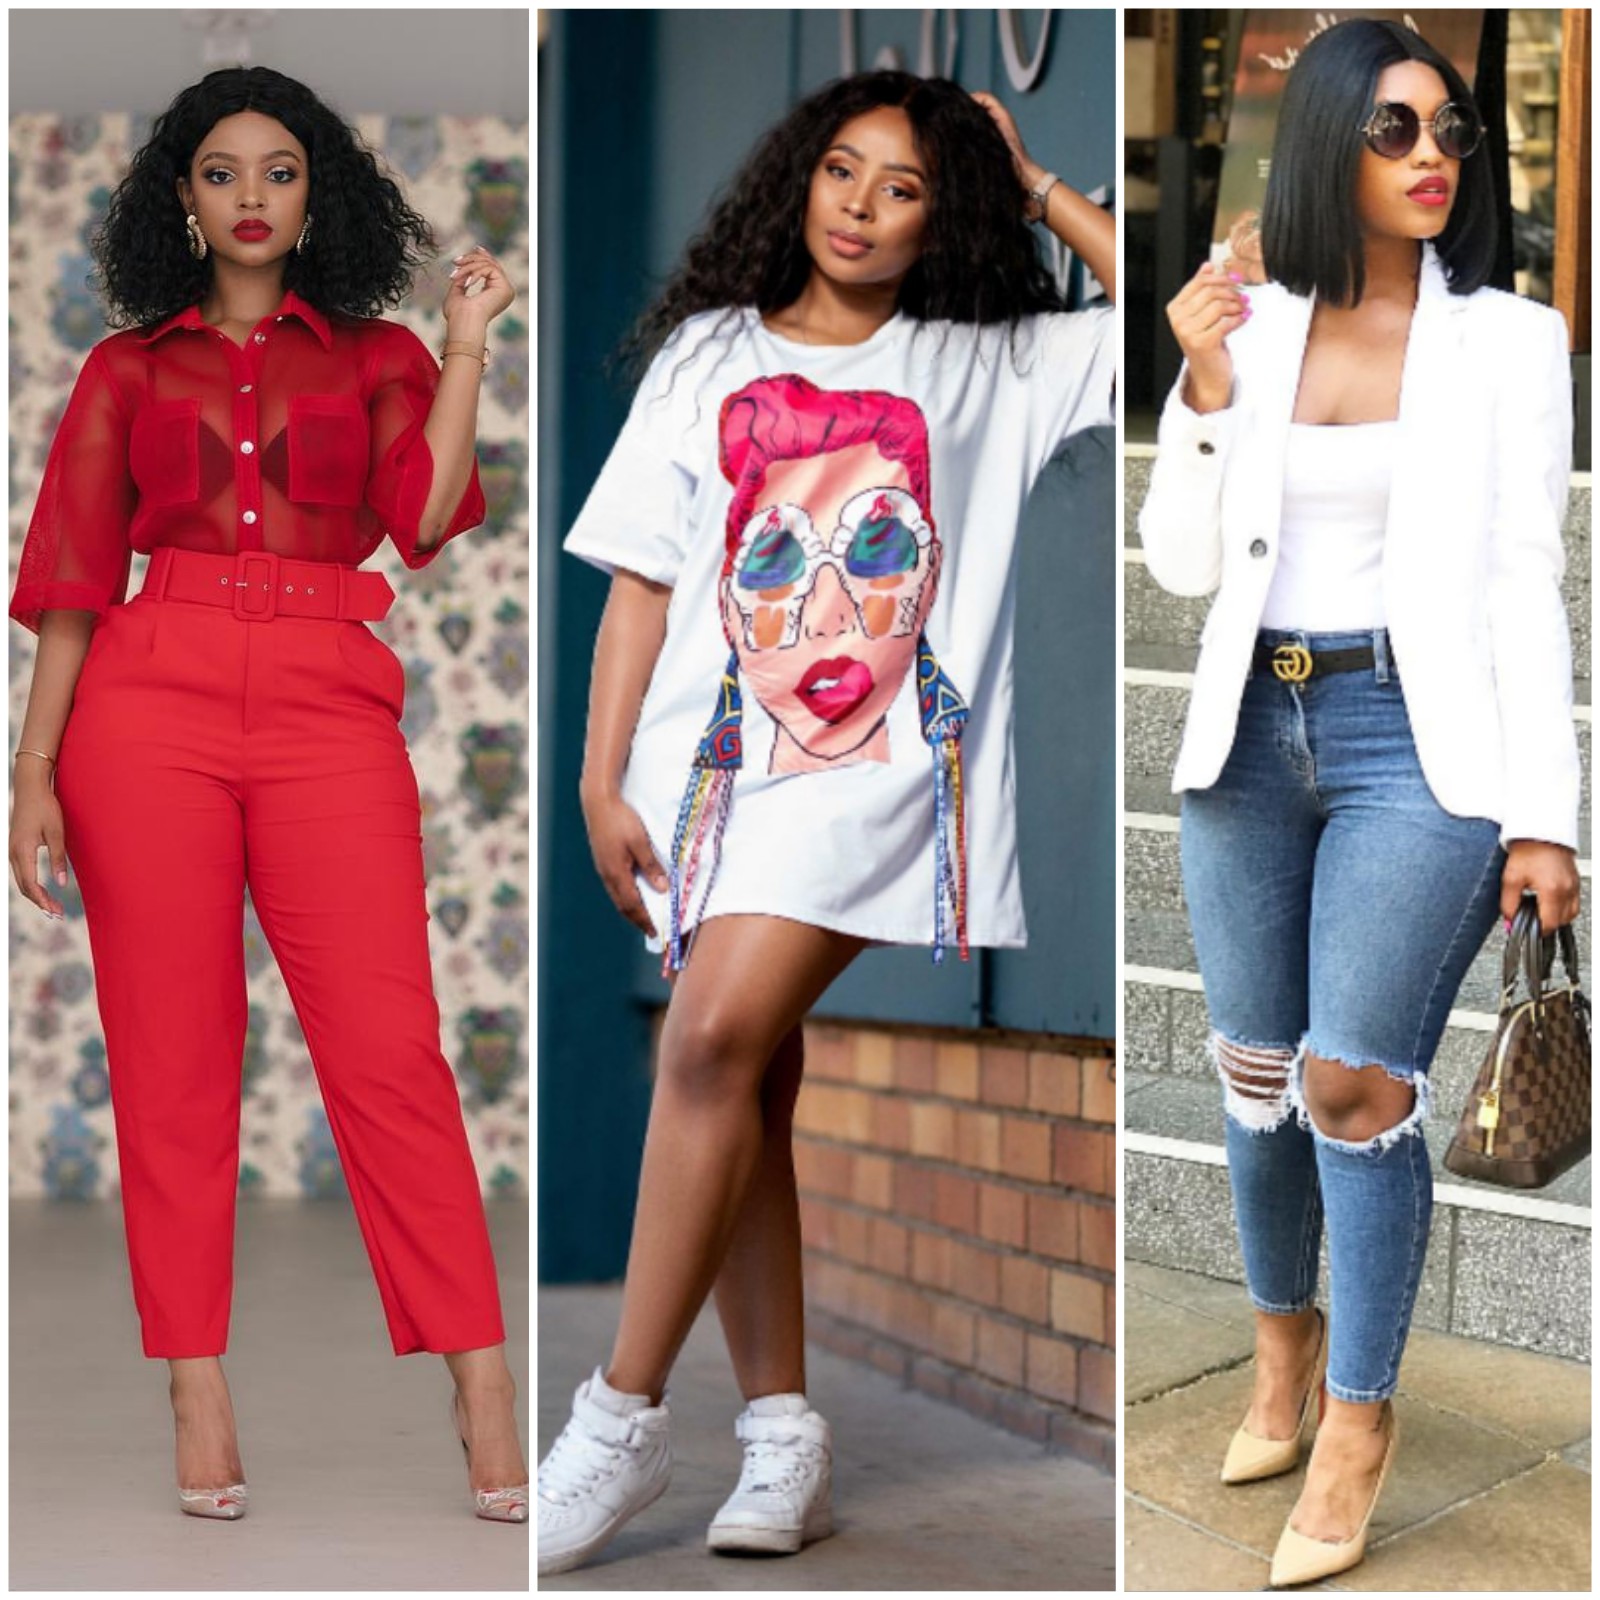 Best Fashion Trends to copy from Instagram fashenista